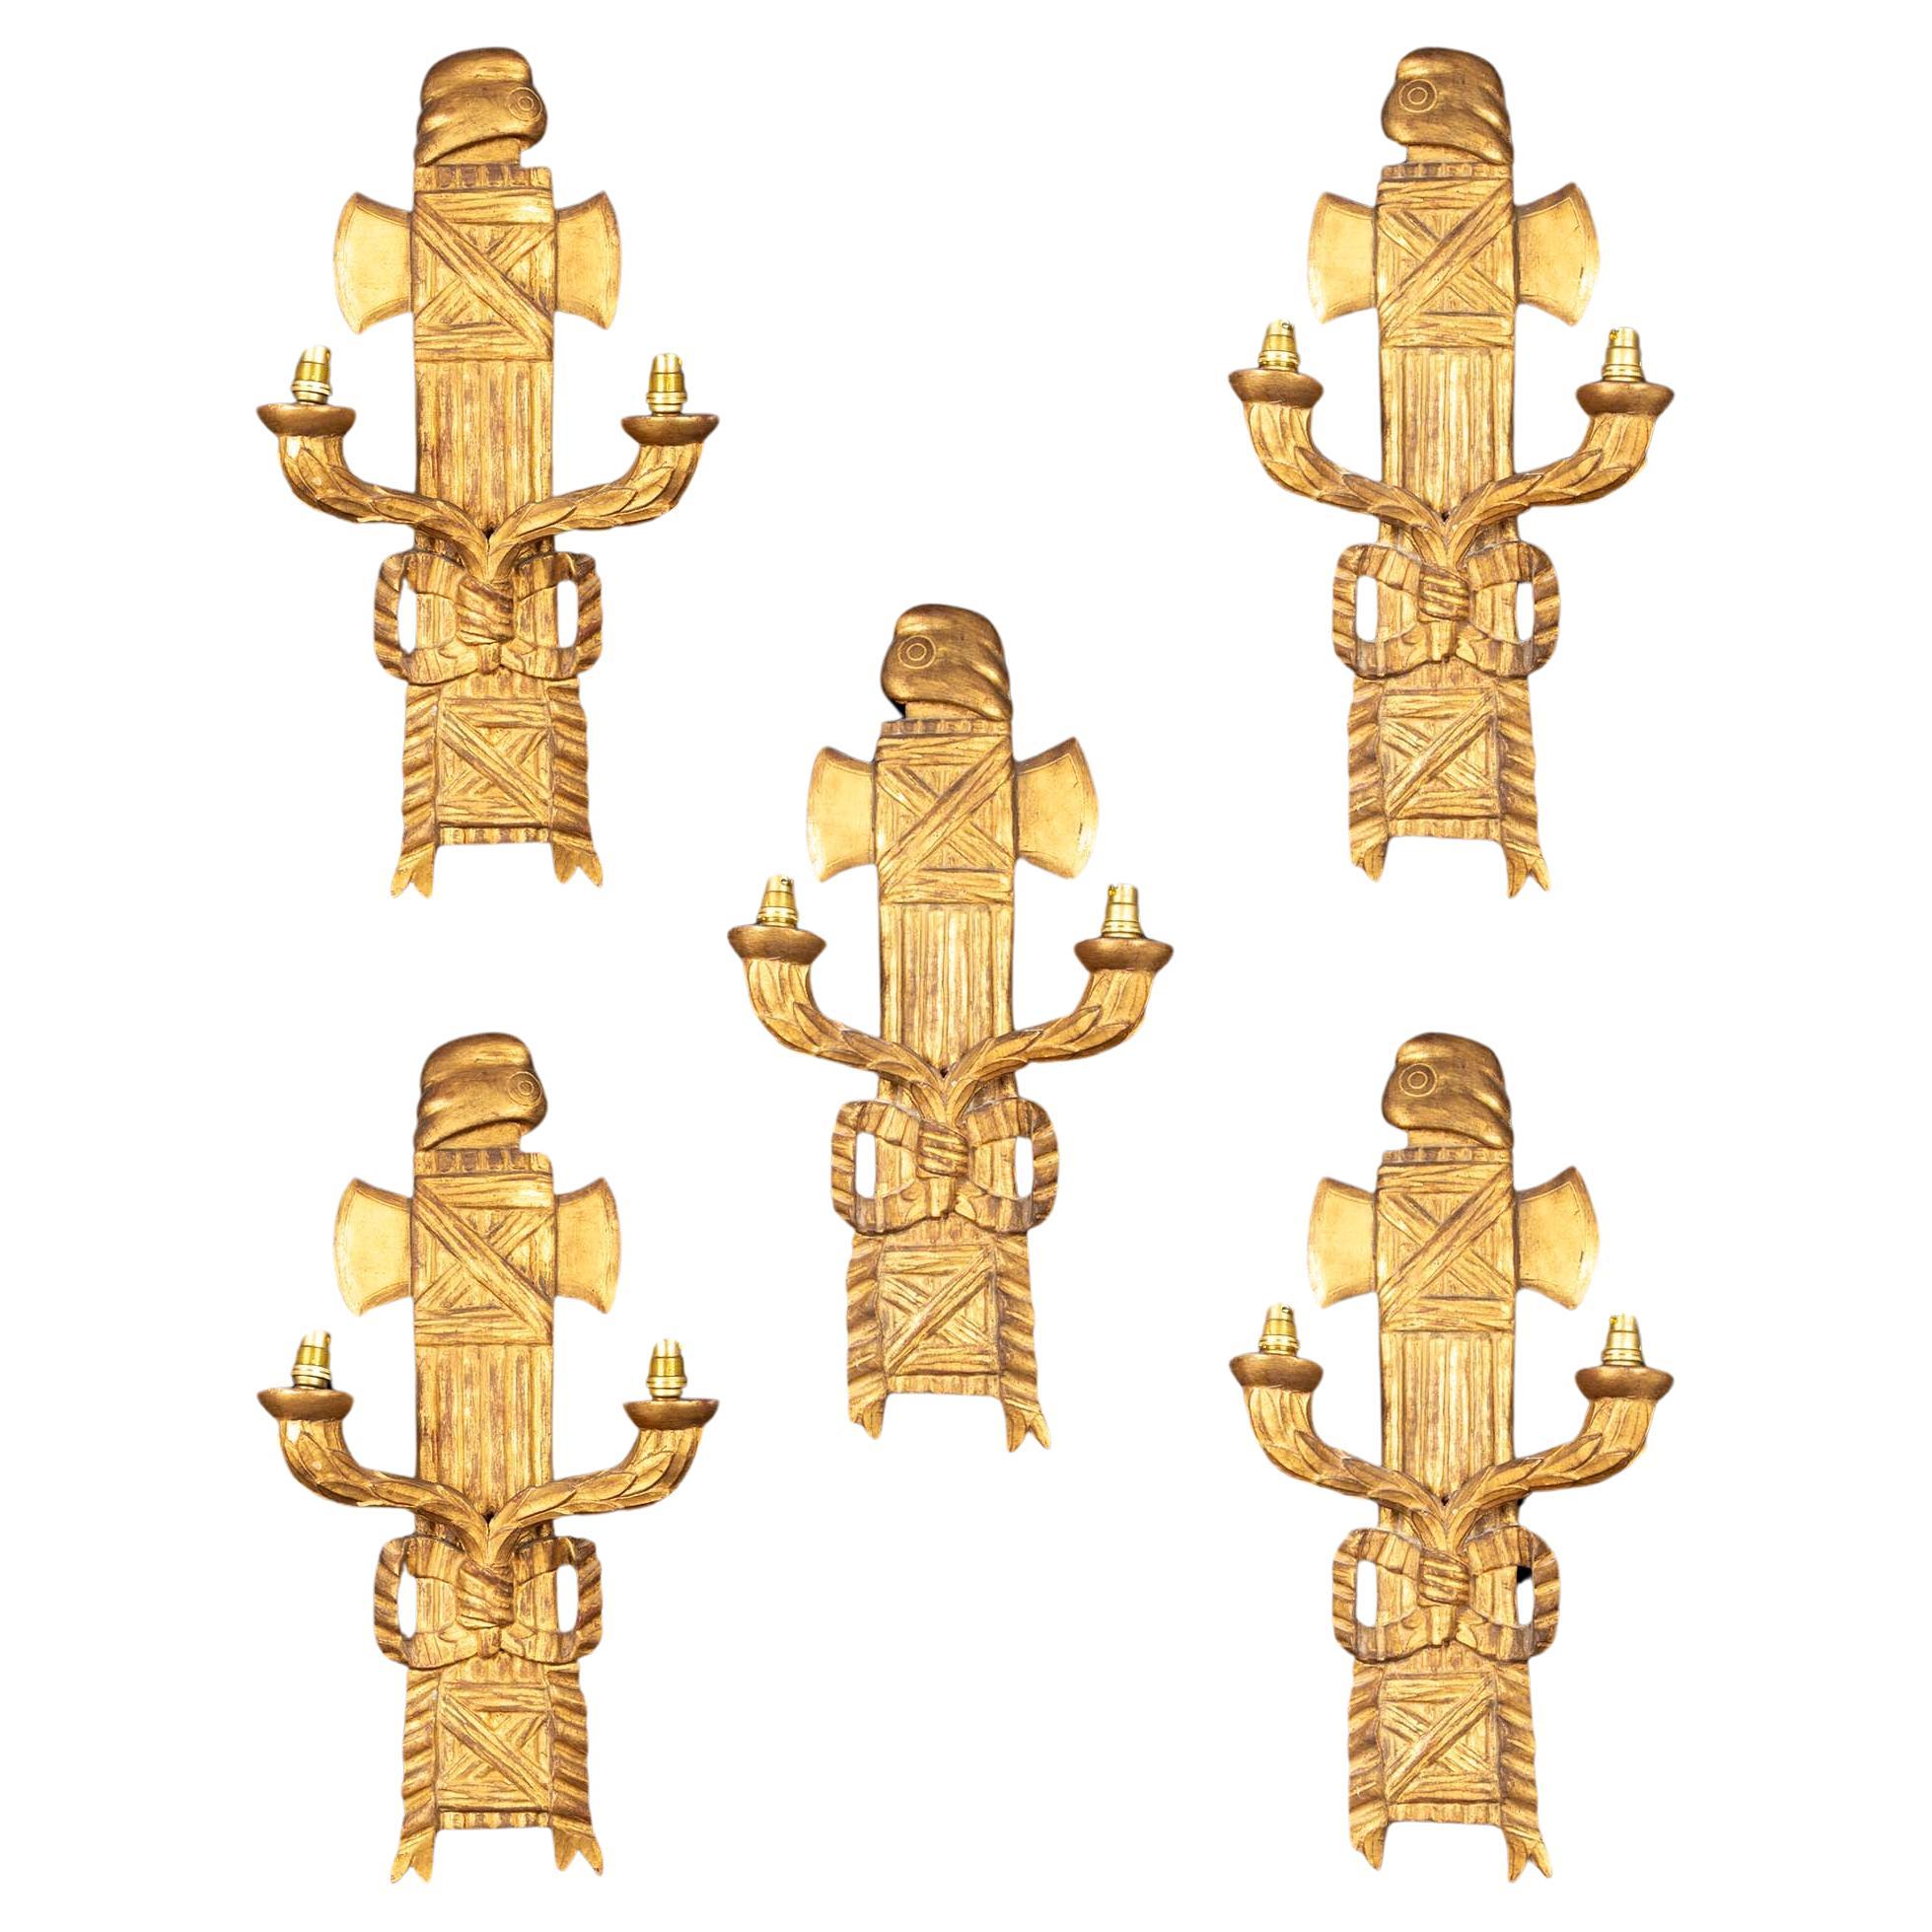 Revolutionary Illumination: Symbolism and Craftsmanship in 19th C. Wall Sconces For Sale